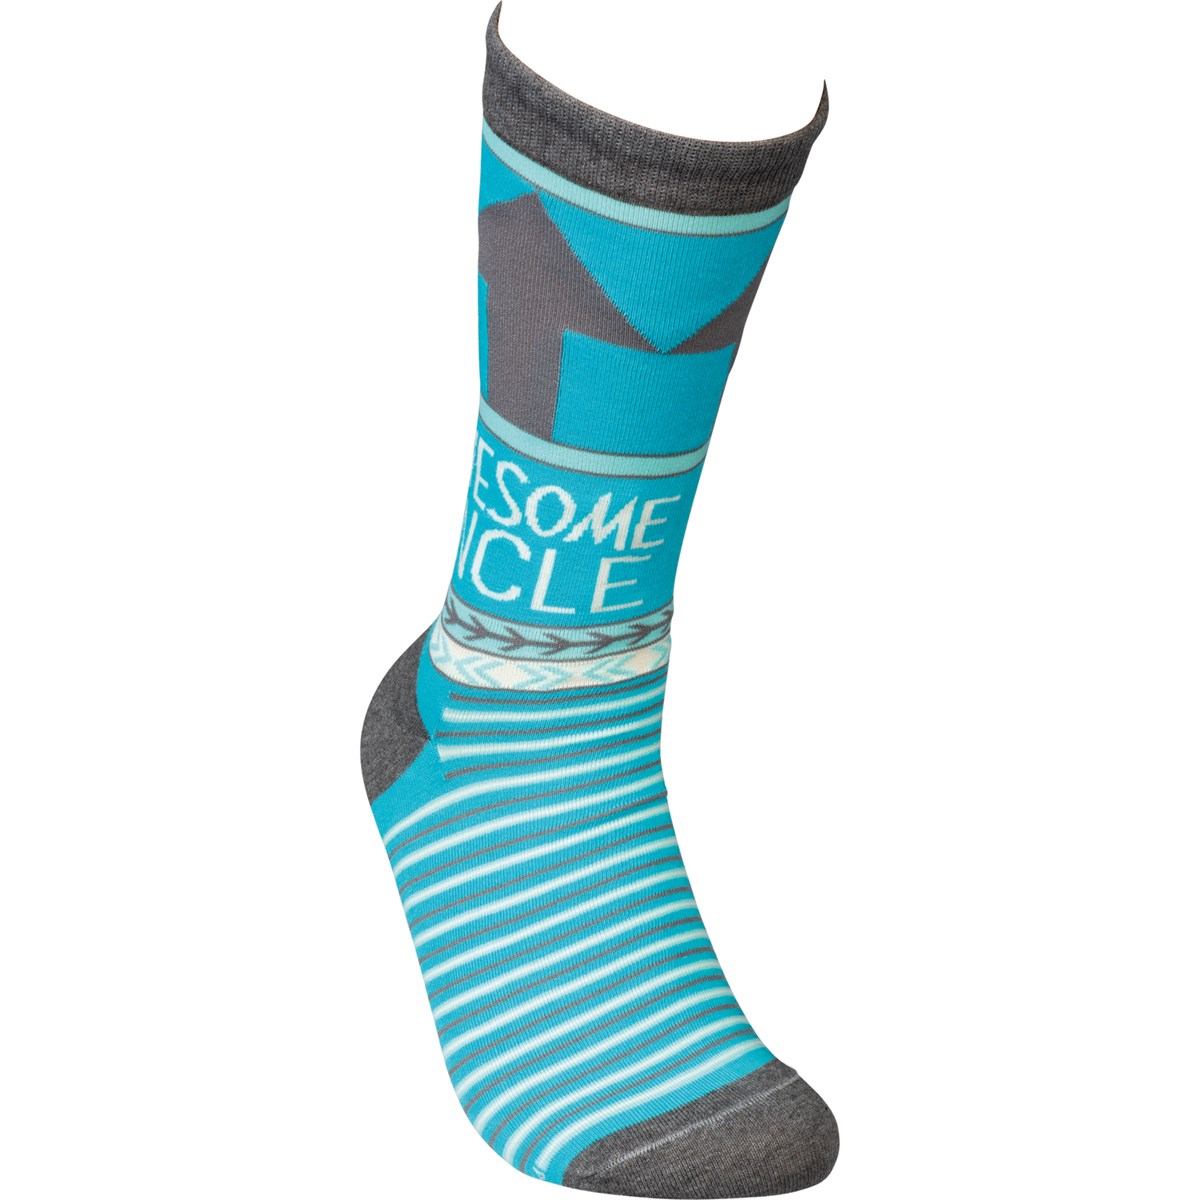 Socks - Awesome Uncle - One Size Fits Most - Cotton, Nylon, Spandex